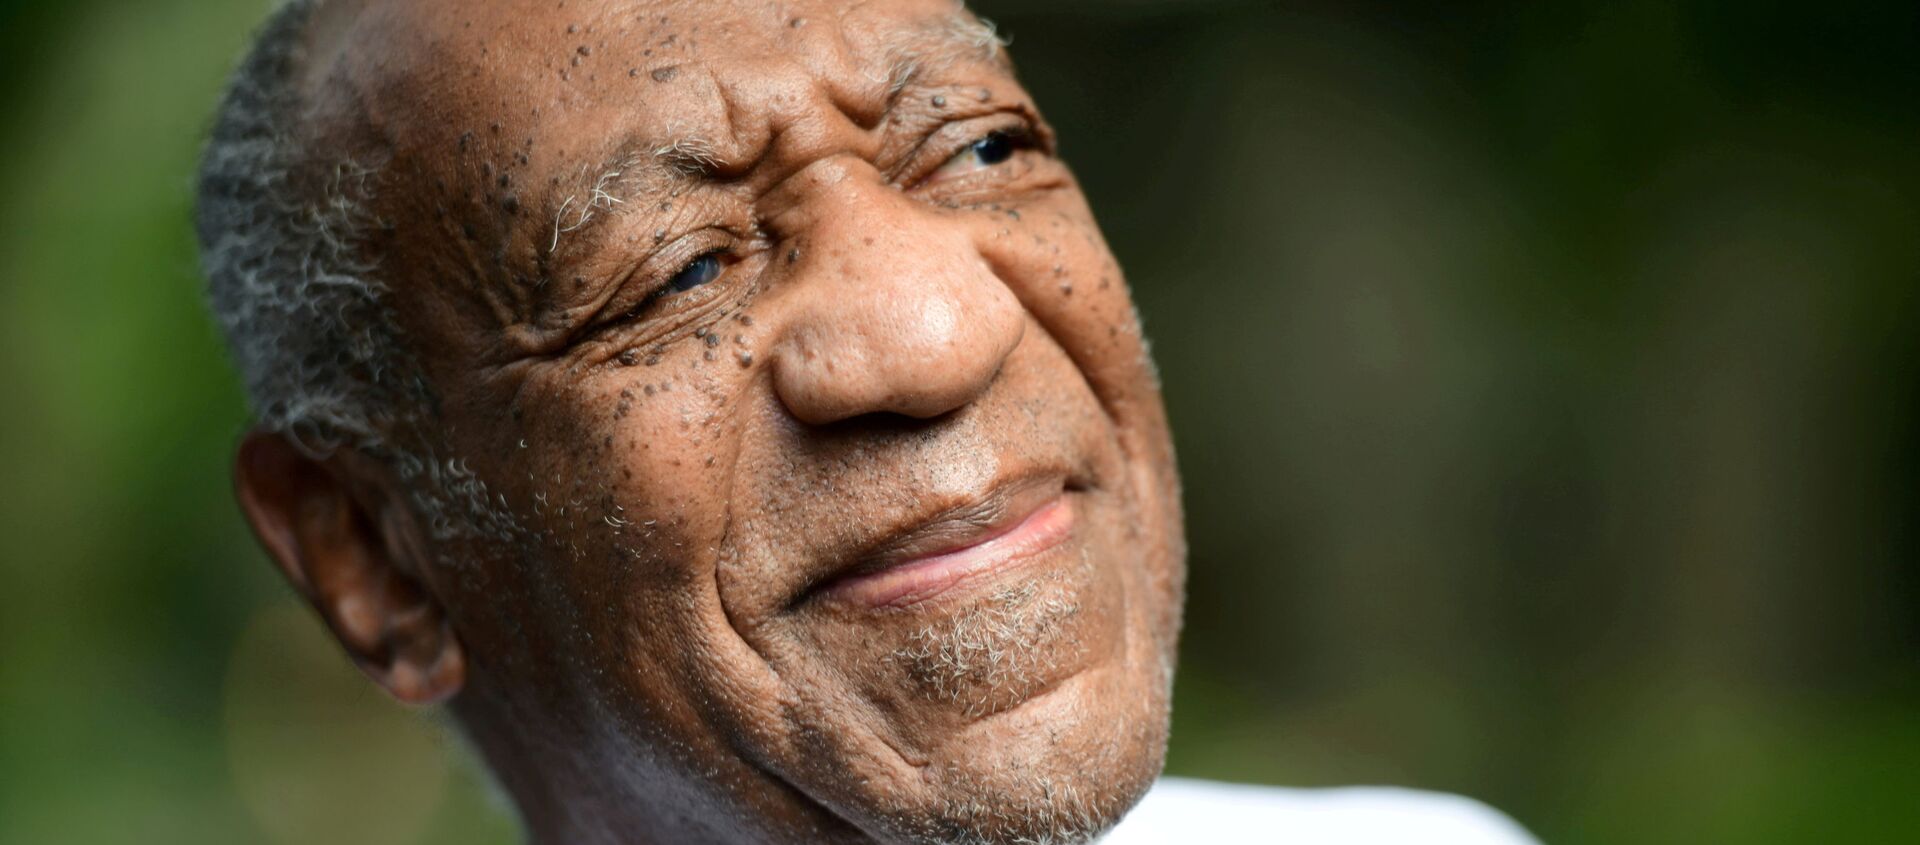 Bill Cosby looks on outside his house after Pennsylvania's highest court overturned his sexual assault conviction and ordered him released from prison immediately, in Elkins Park - Sputnik International, 1920, 03.07.2021